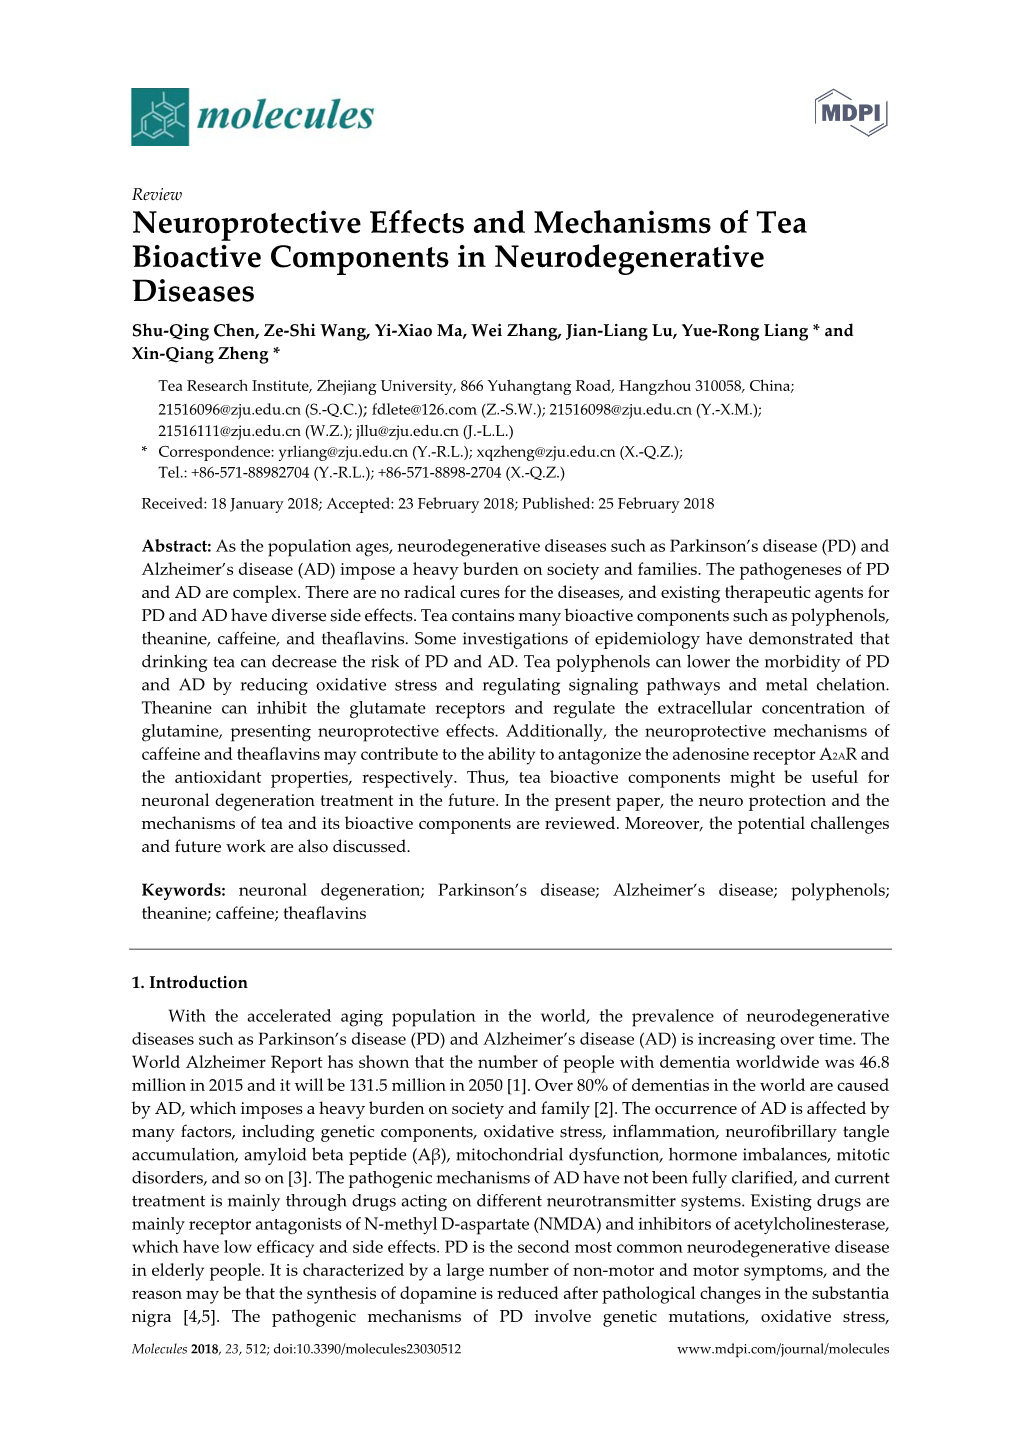 Neuroprotective Effects and Mechanisms of Tea Bioactive